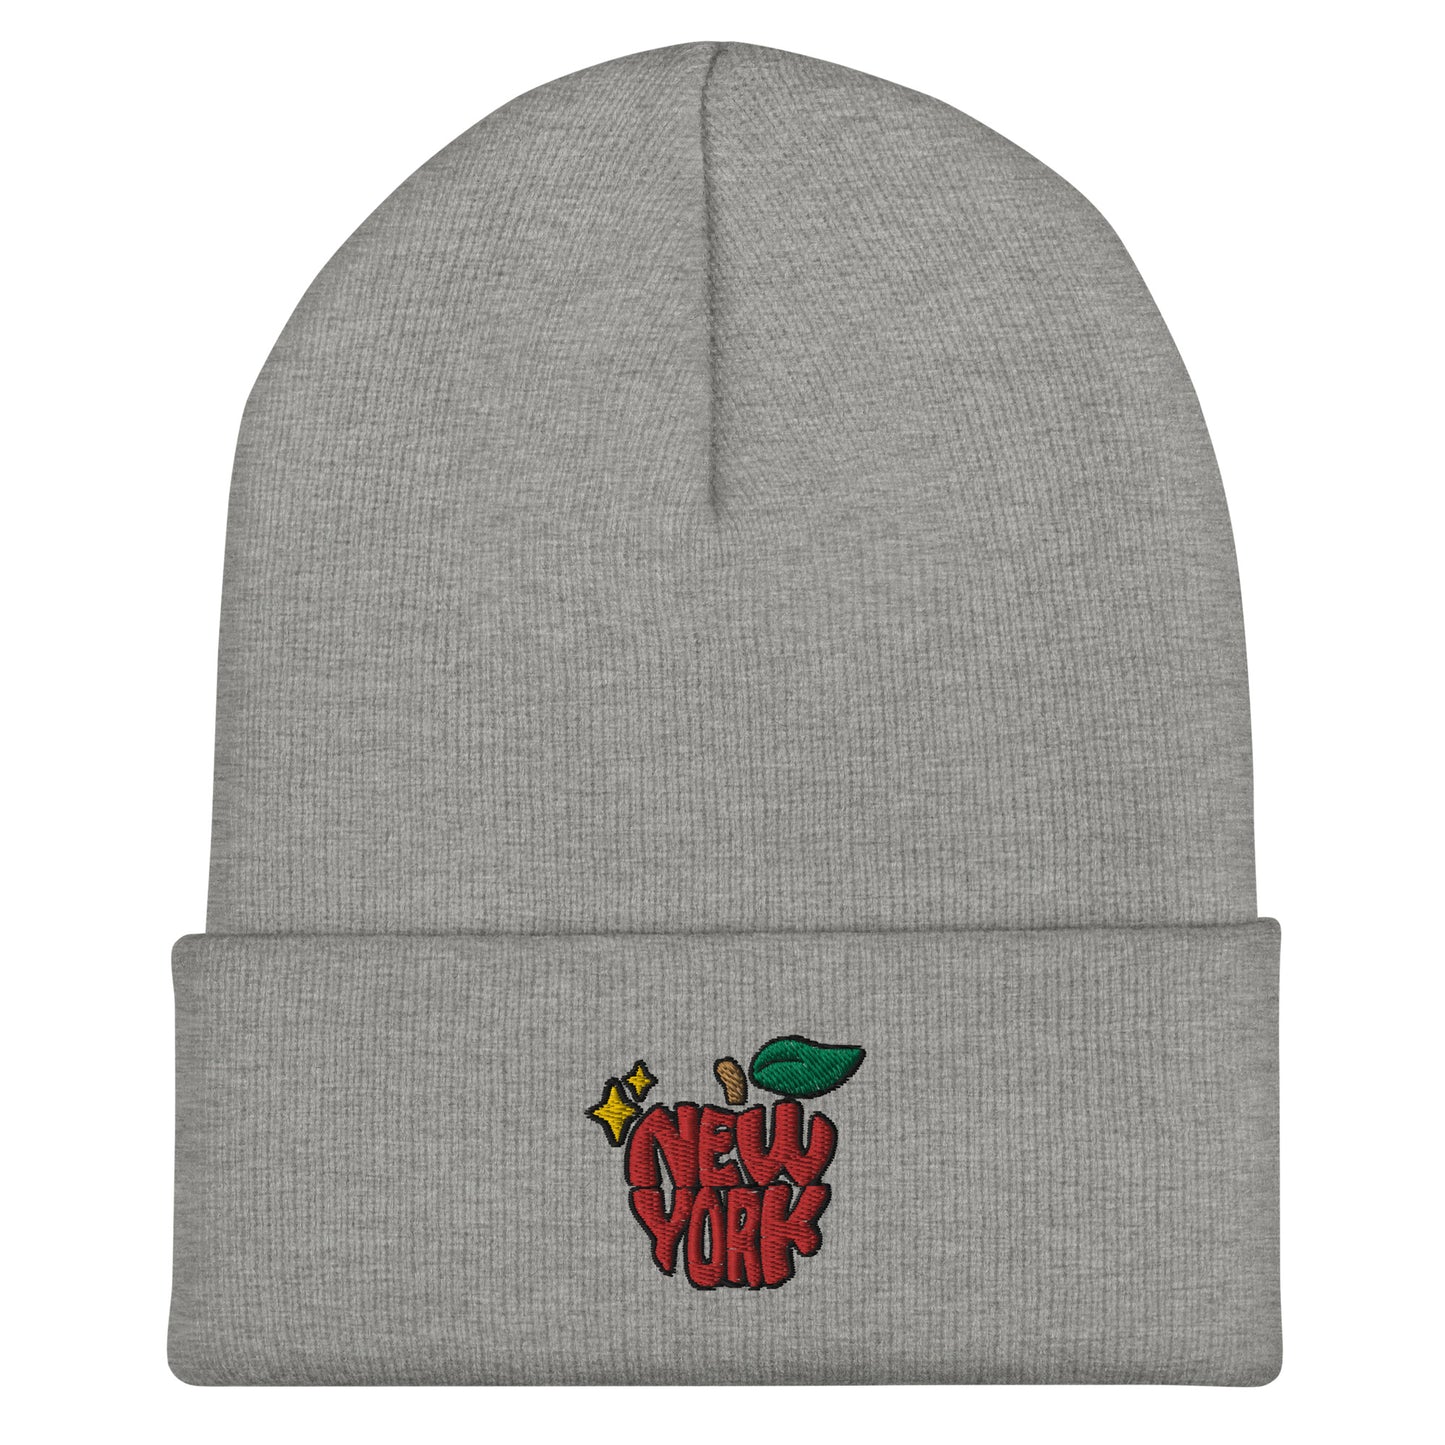 New York Apple Logo Embroidered Grey Cuffed Beanie Hat Scattered Streetwear